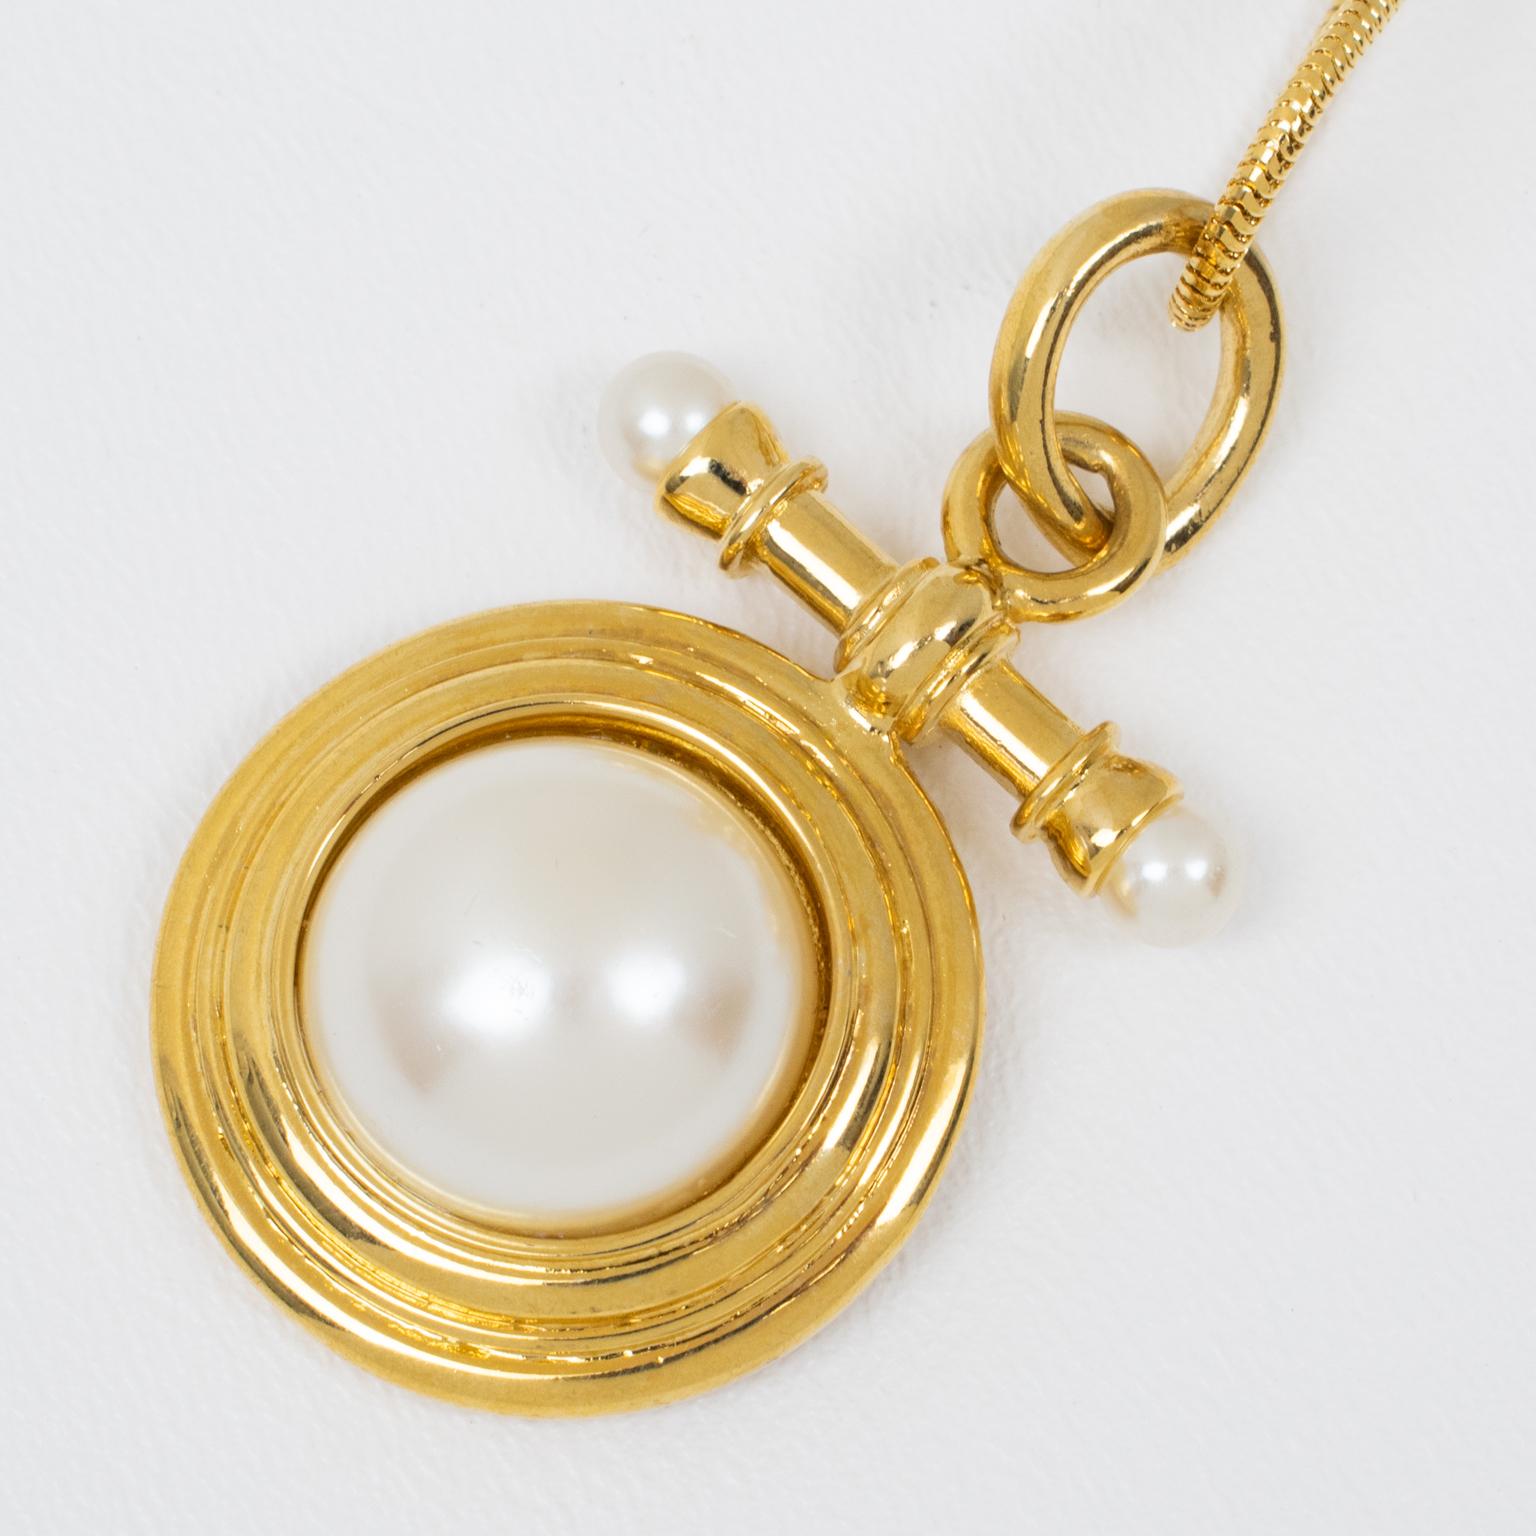 Givenchy Paris Gilt Metal Geometric Pendant Necklace with Pearl Cabochons For Sale 2